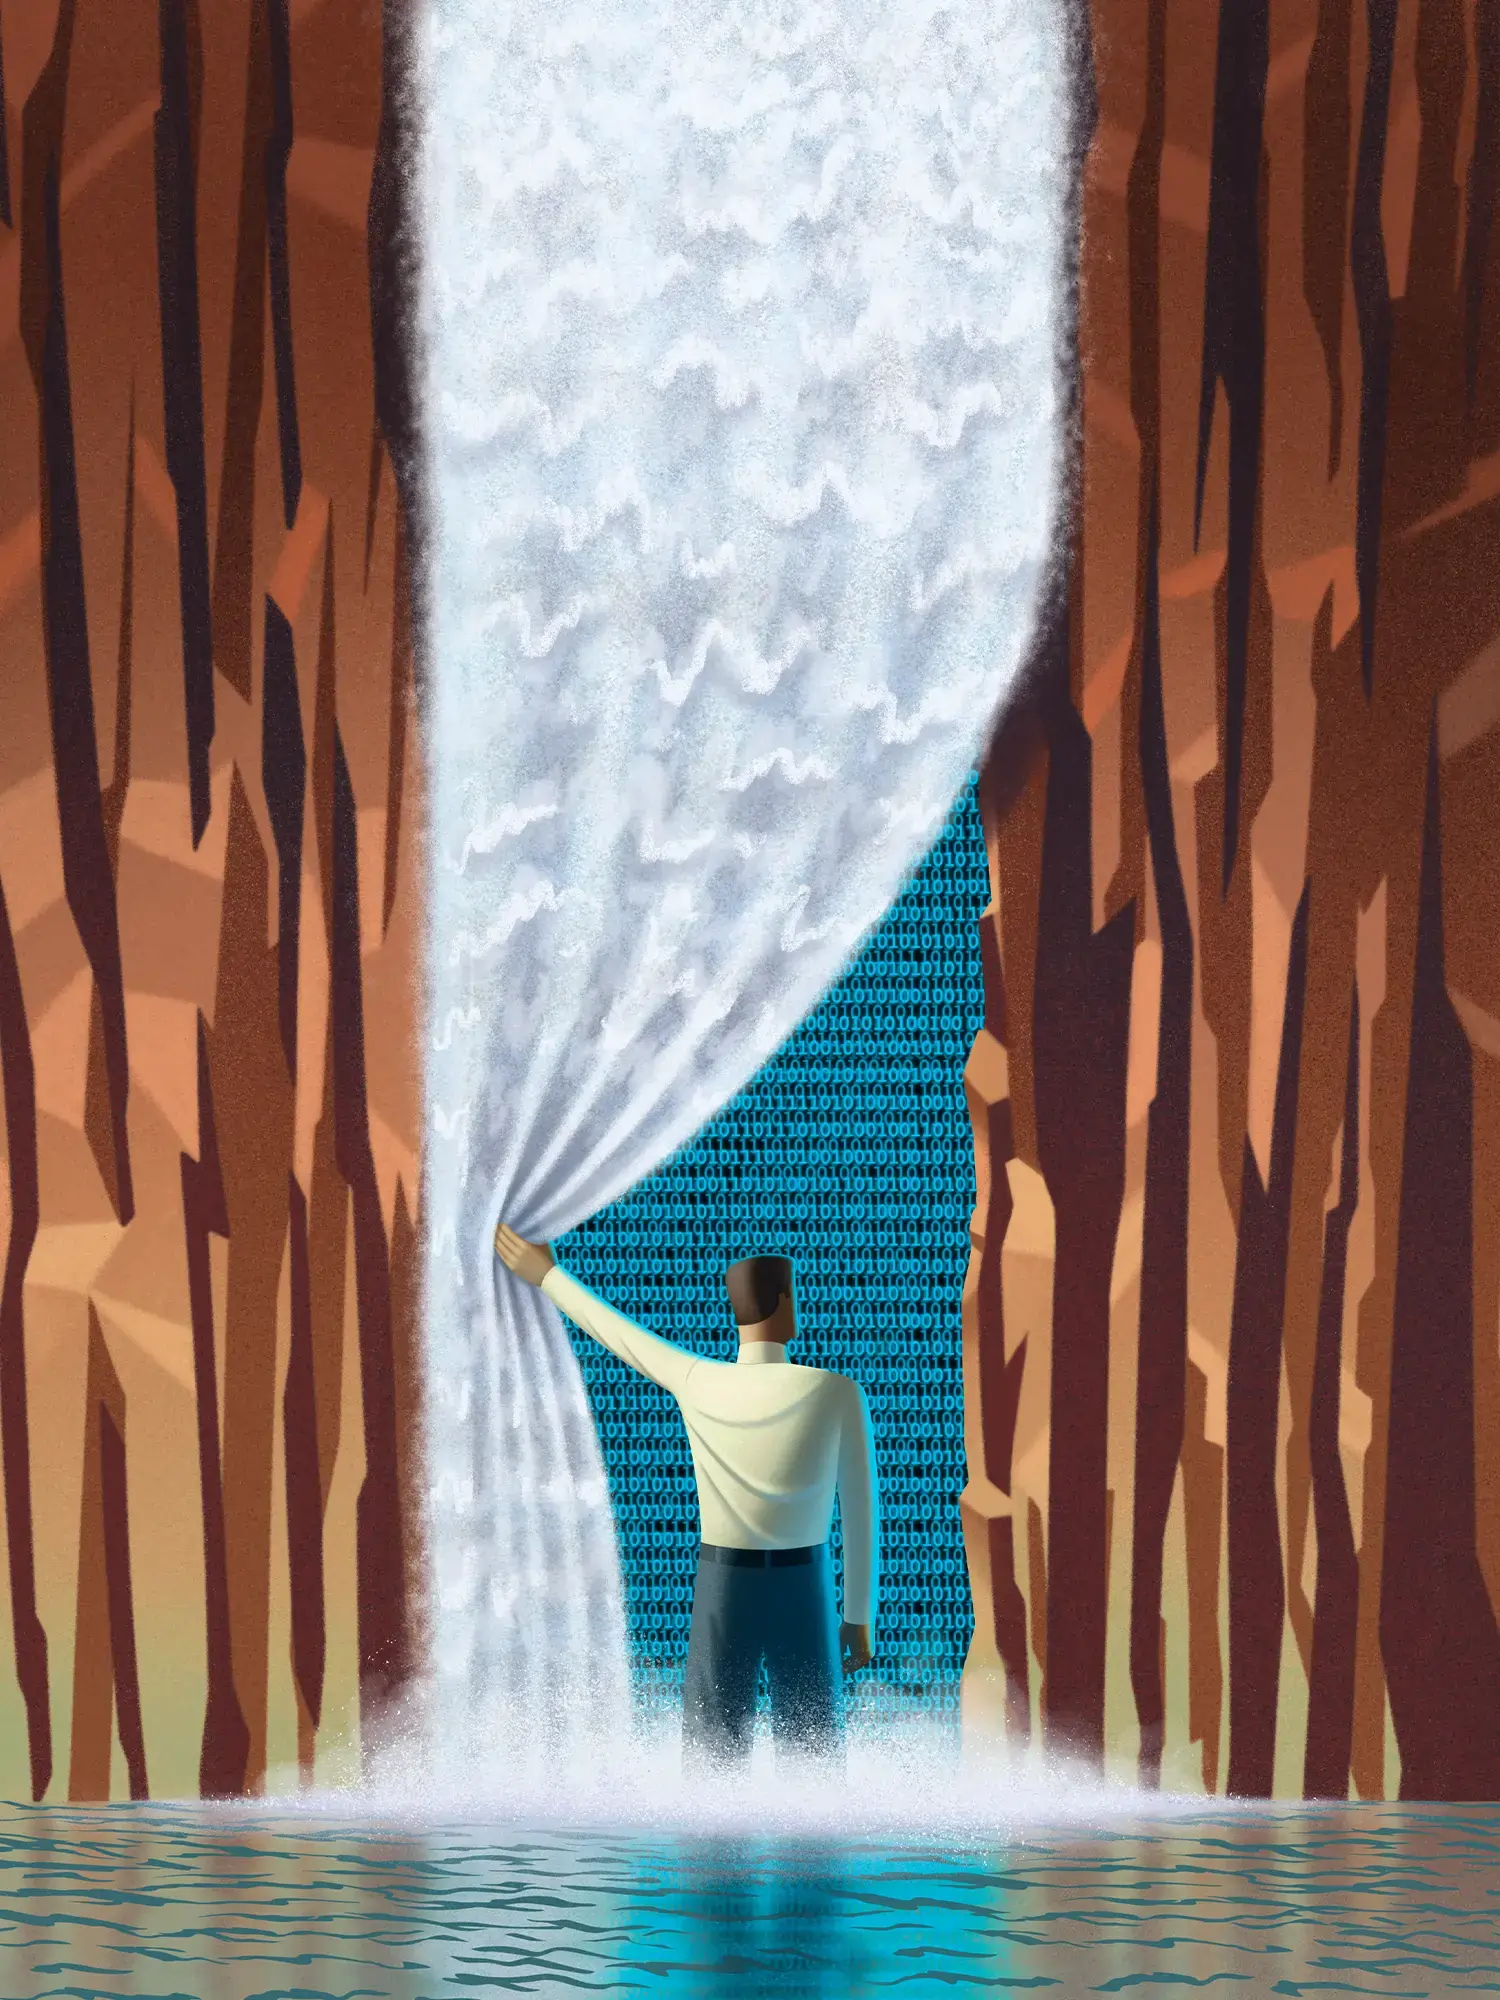 back view of a blocky illustrated man standing at the base of a waterfall, the figure pulls back a side of the waterfall like a shower curtain to reveal lines of bright blue binary numbers against a black background